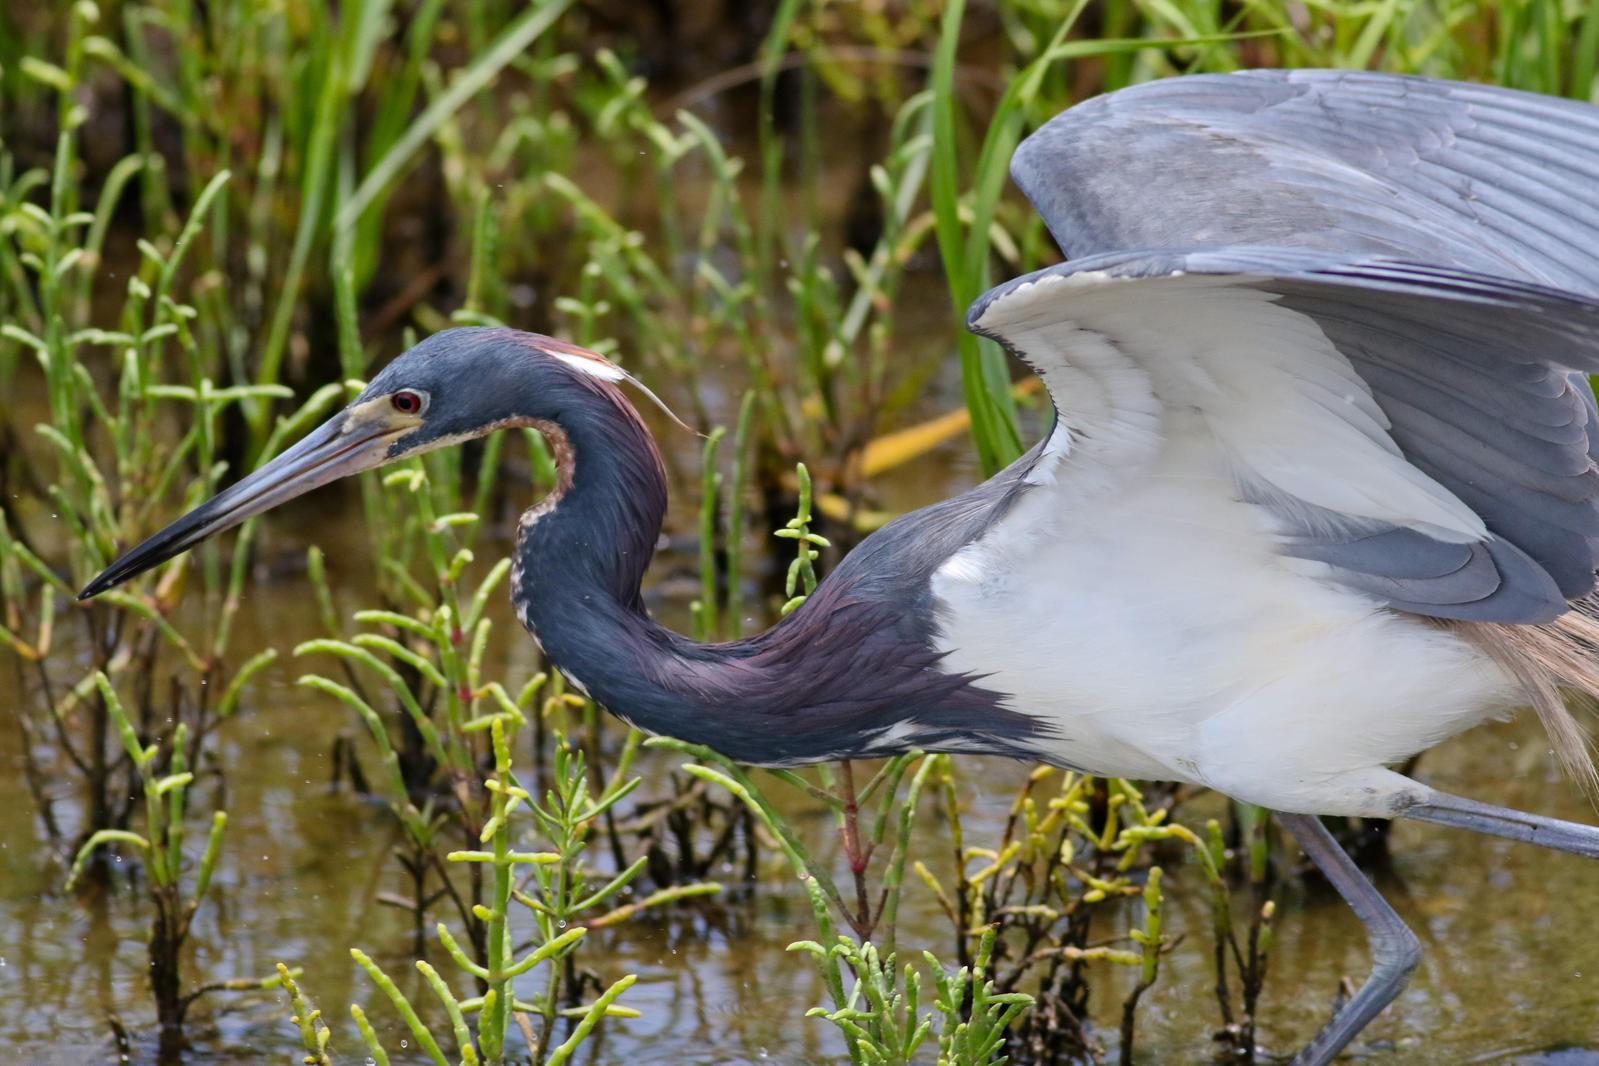 Tricolored Heron Photo by Tom Ford-Hutchinson